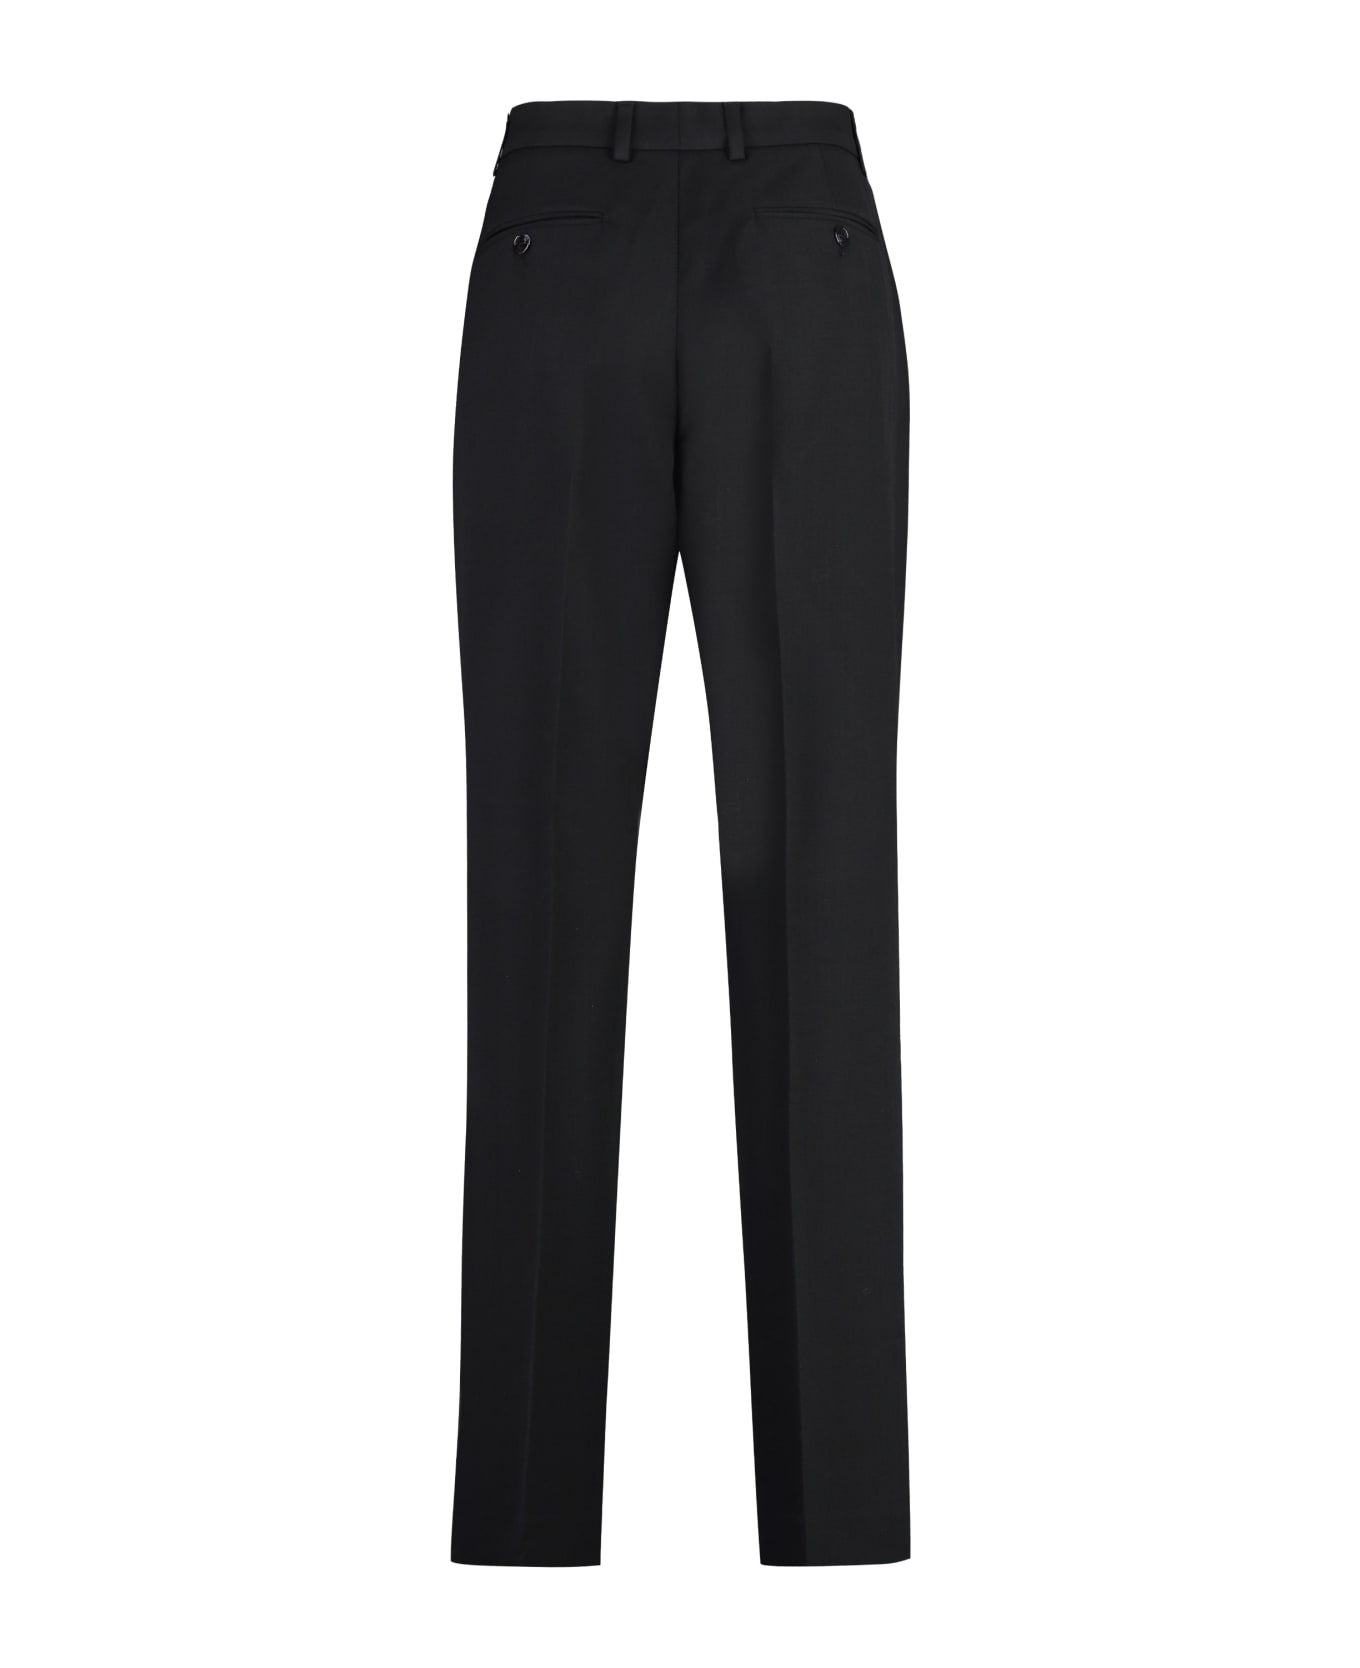 Acne Studios Wool Blend Tailored Trousers - black